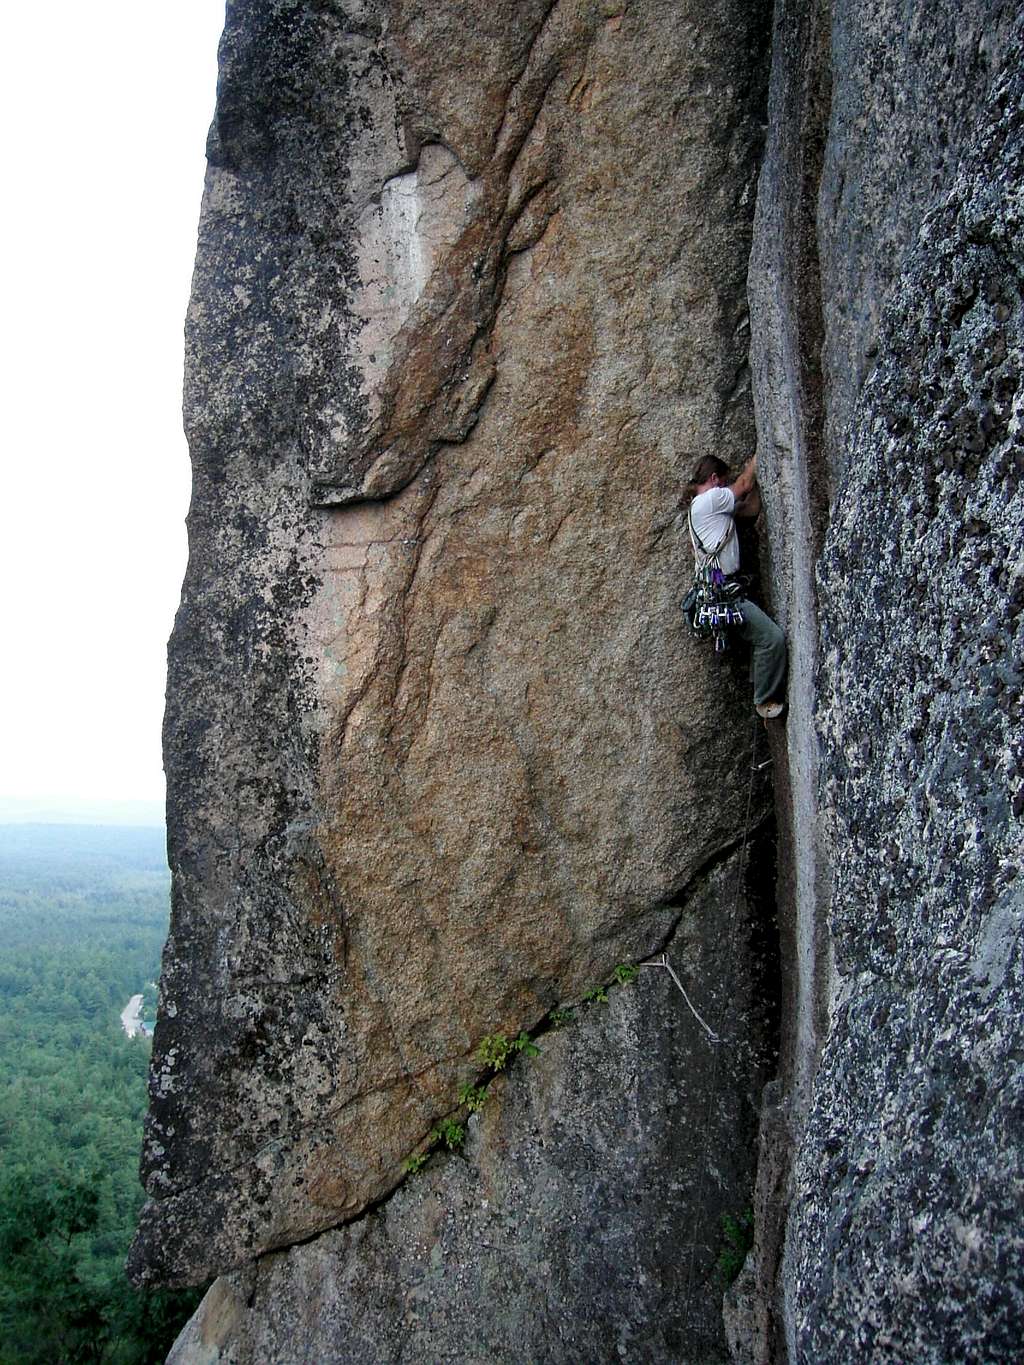 The Black Crack on Cathedral Ledge